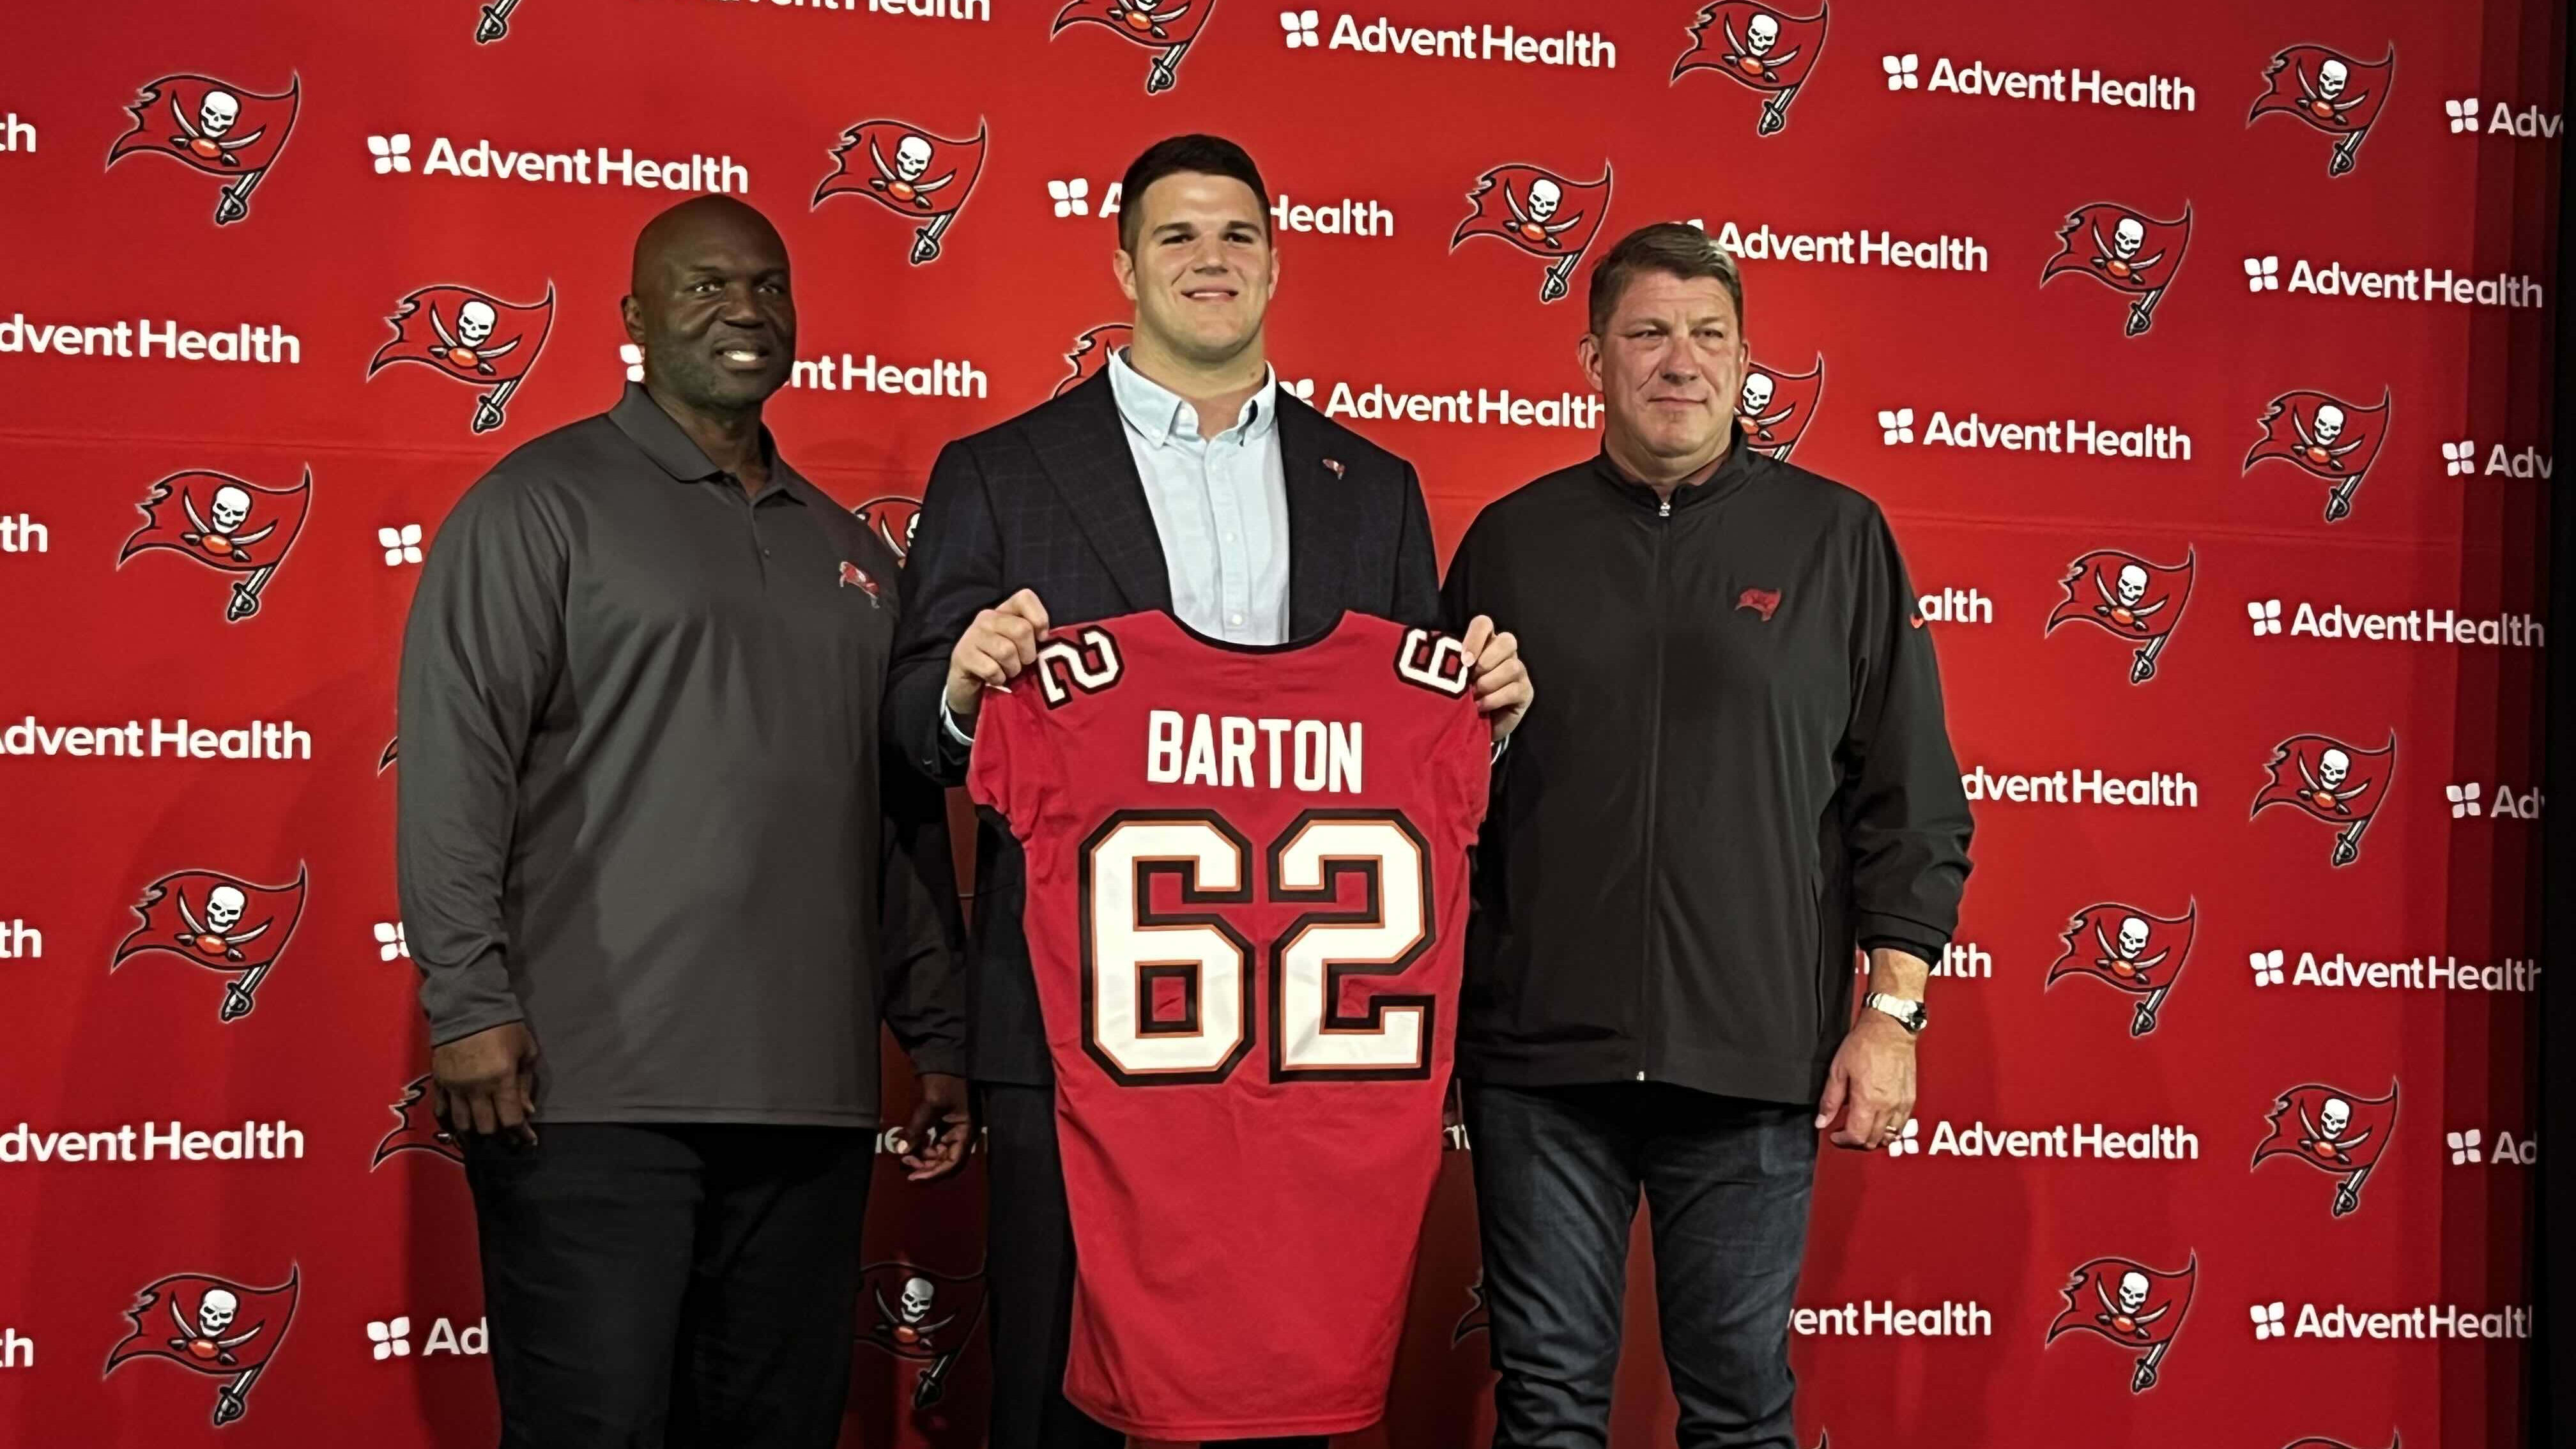 WATCH: First Round Draft Pick Graham Barton’s First Day With Buccaneers